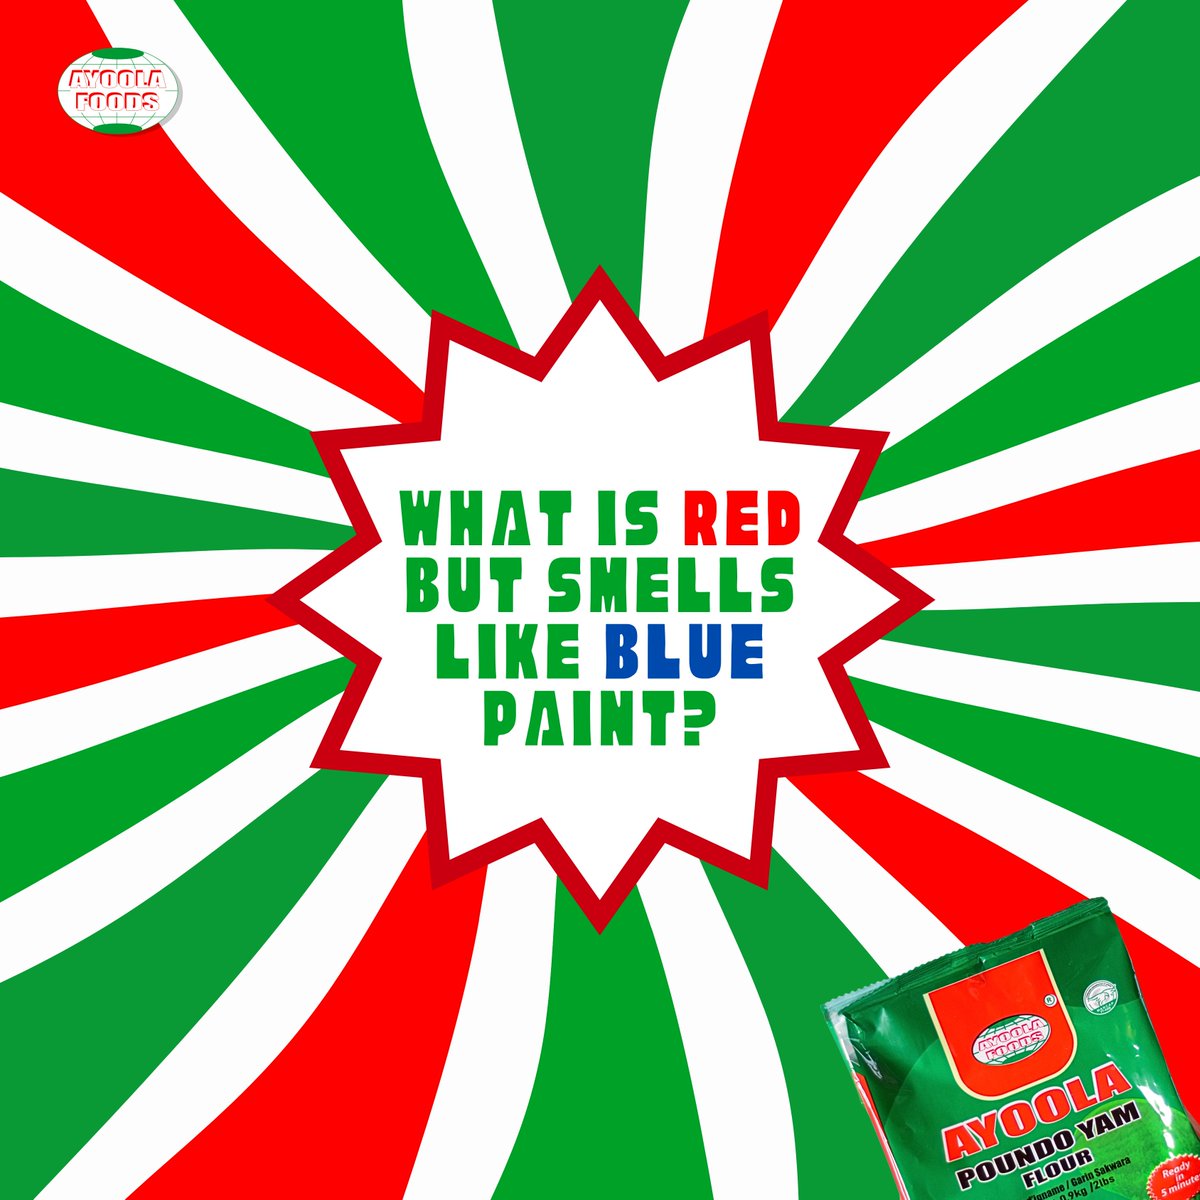 We know you know this one, just tell us the answer in the comments.😜

#AyoolaFoods #AyoolaFoodsRiddle #GoodFood #EatRight #MadeInNigeria